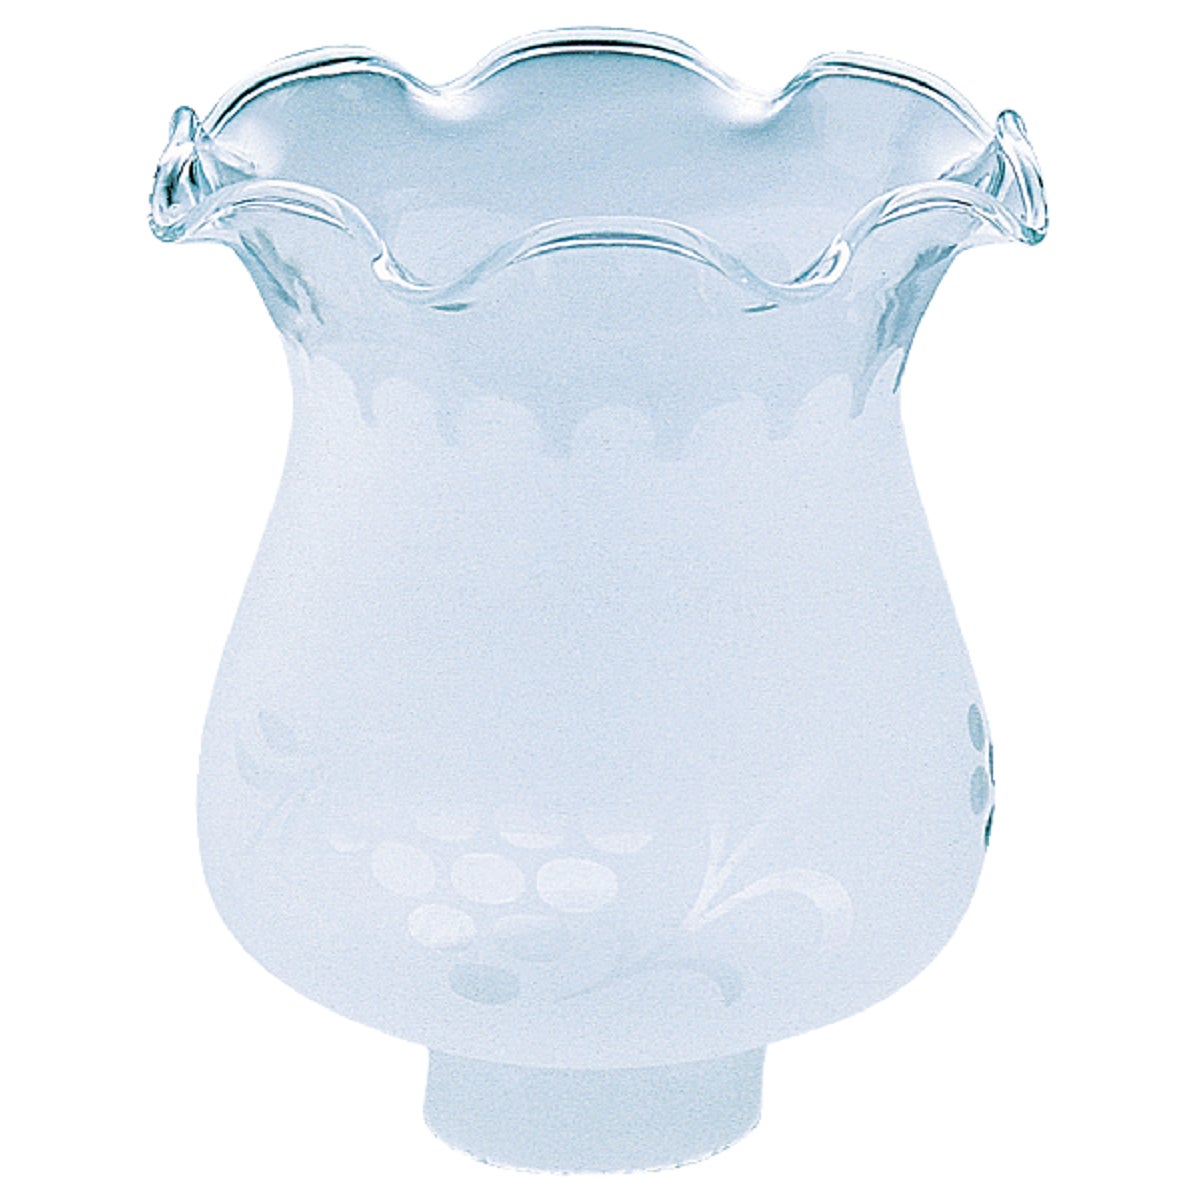 Item 524944, Frosted replacement glass shade. Features an etched design with crimp top.